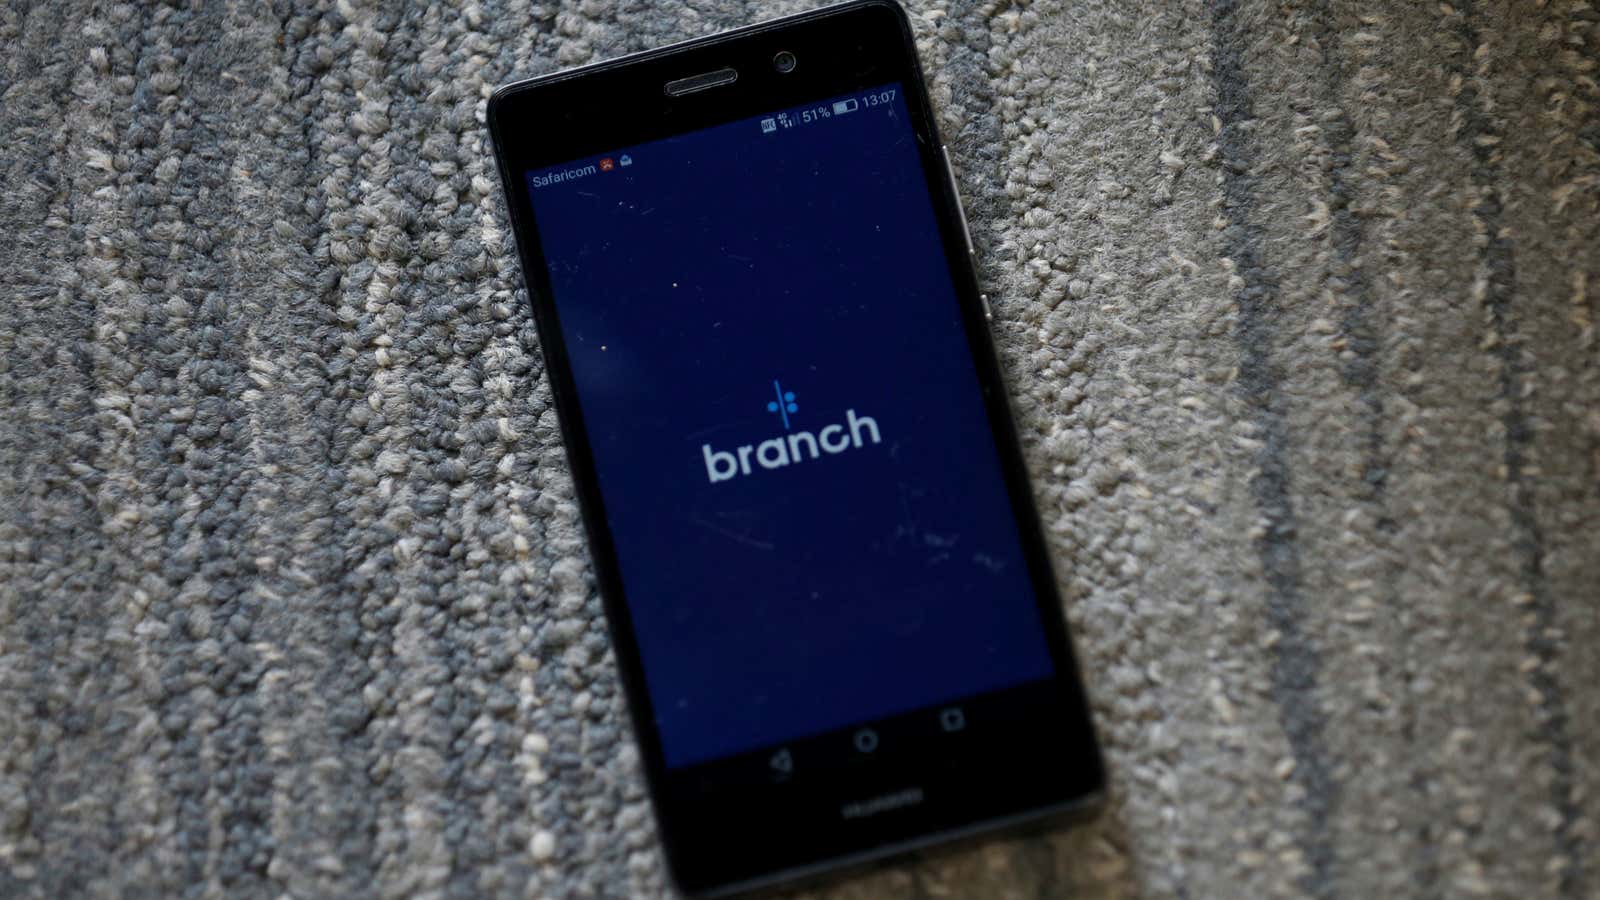 Fintech startups like Branch have raised the largest funding amounts across the continent.